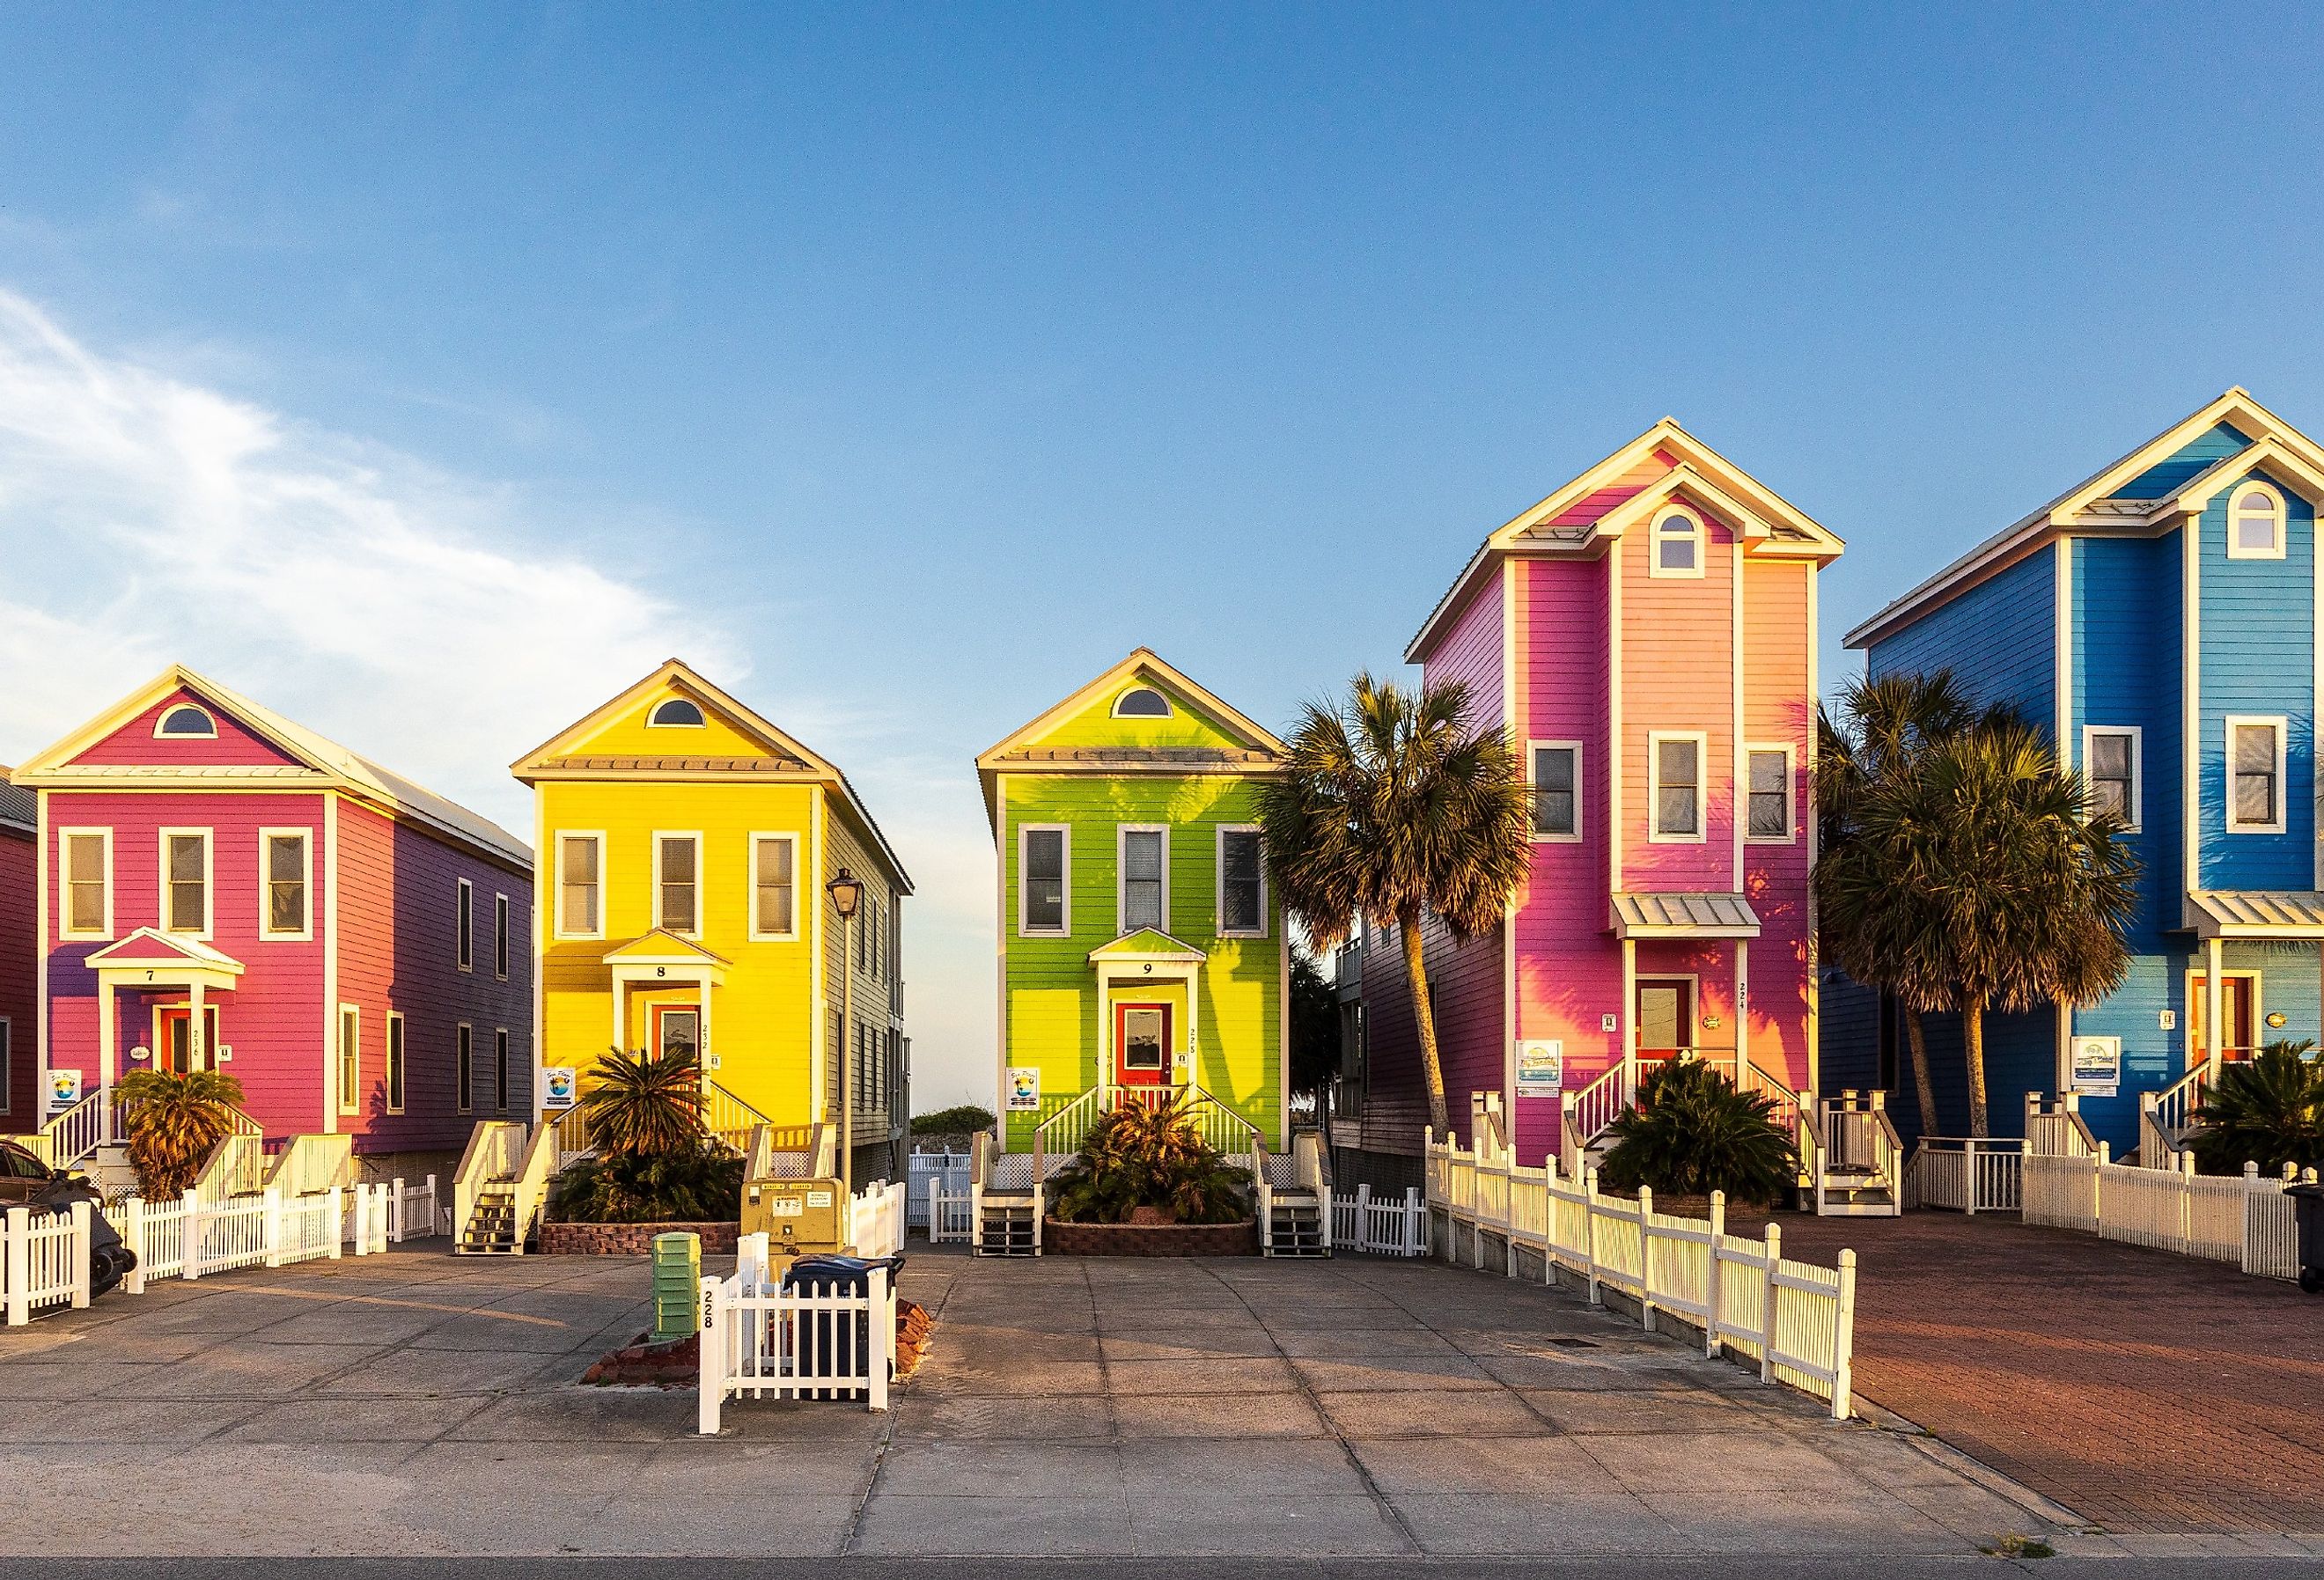 A row of colorful beachfront homes on a beautiful afternoon on St George Island, Florida. Image credit H.J. Herrera via Shutterstock